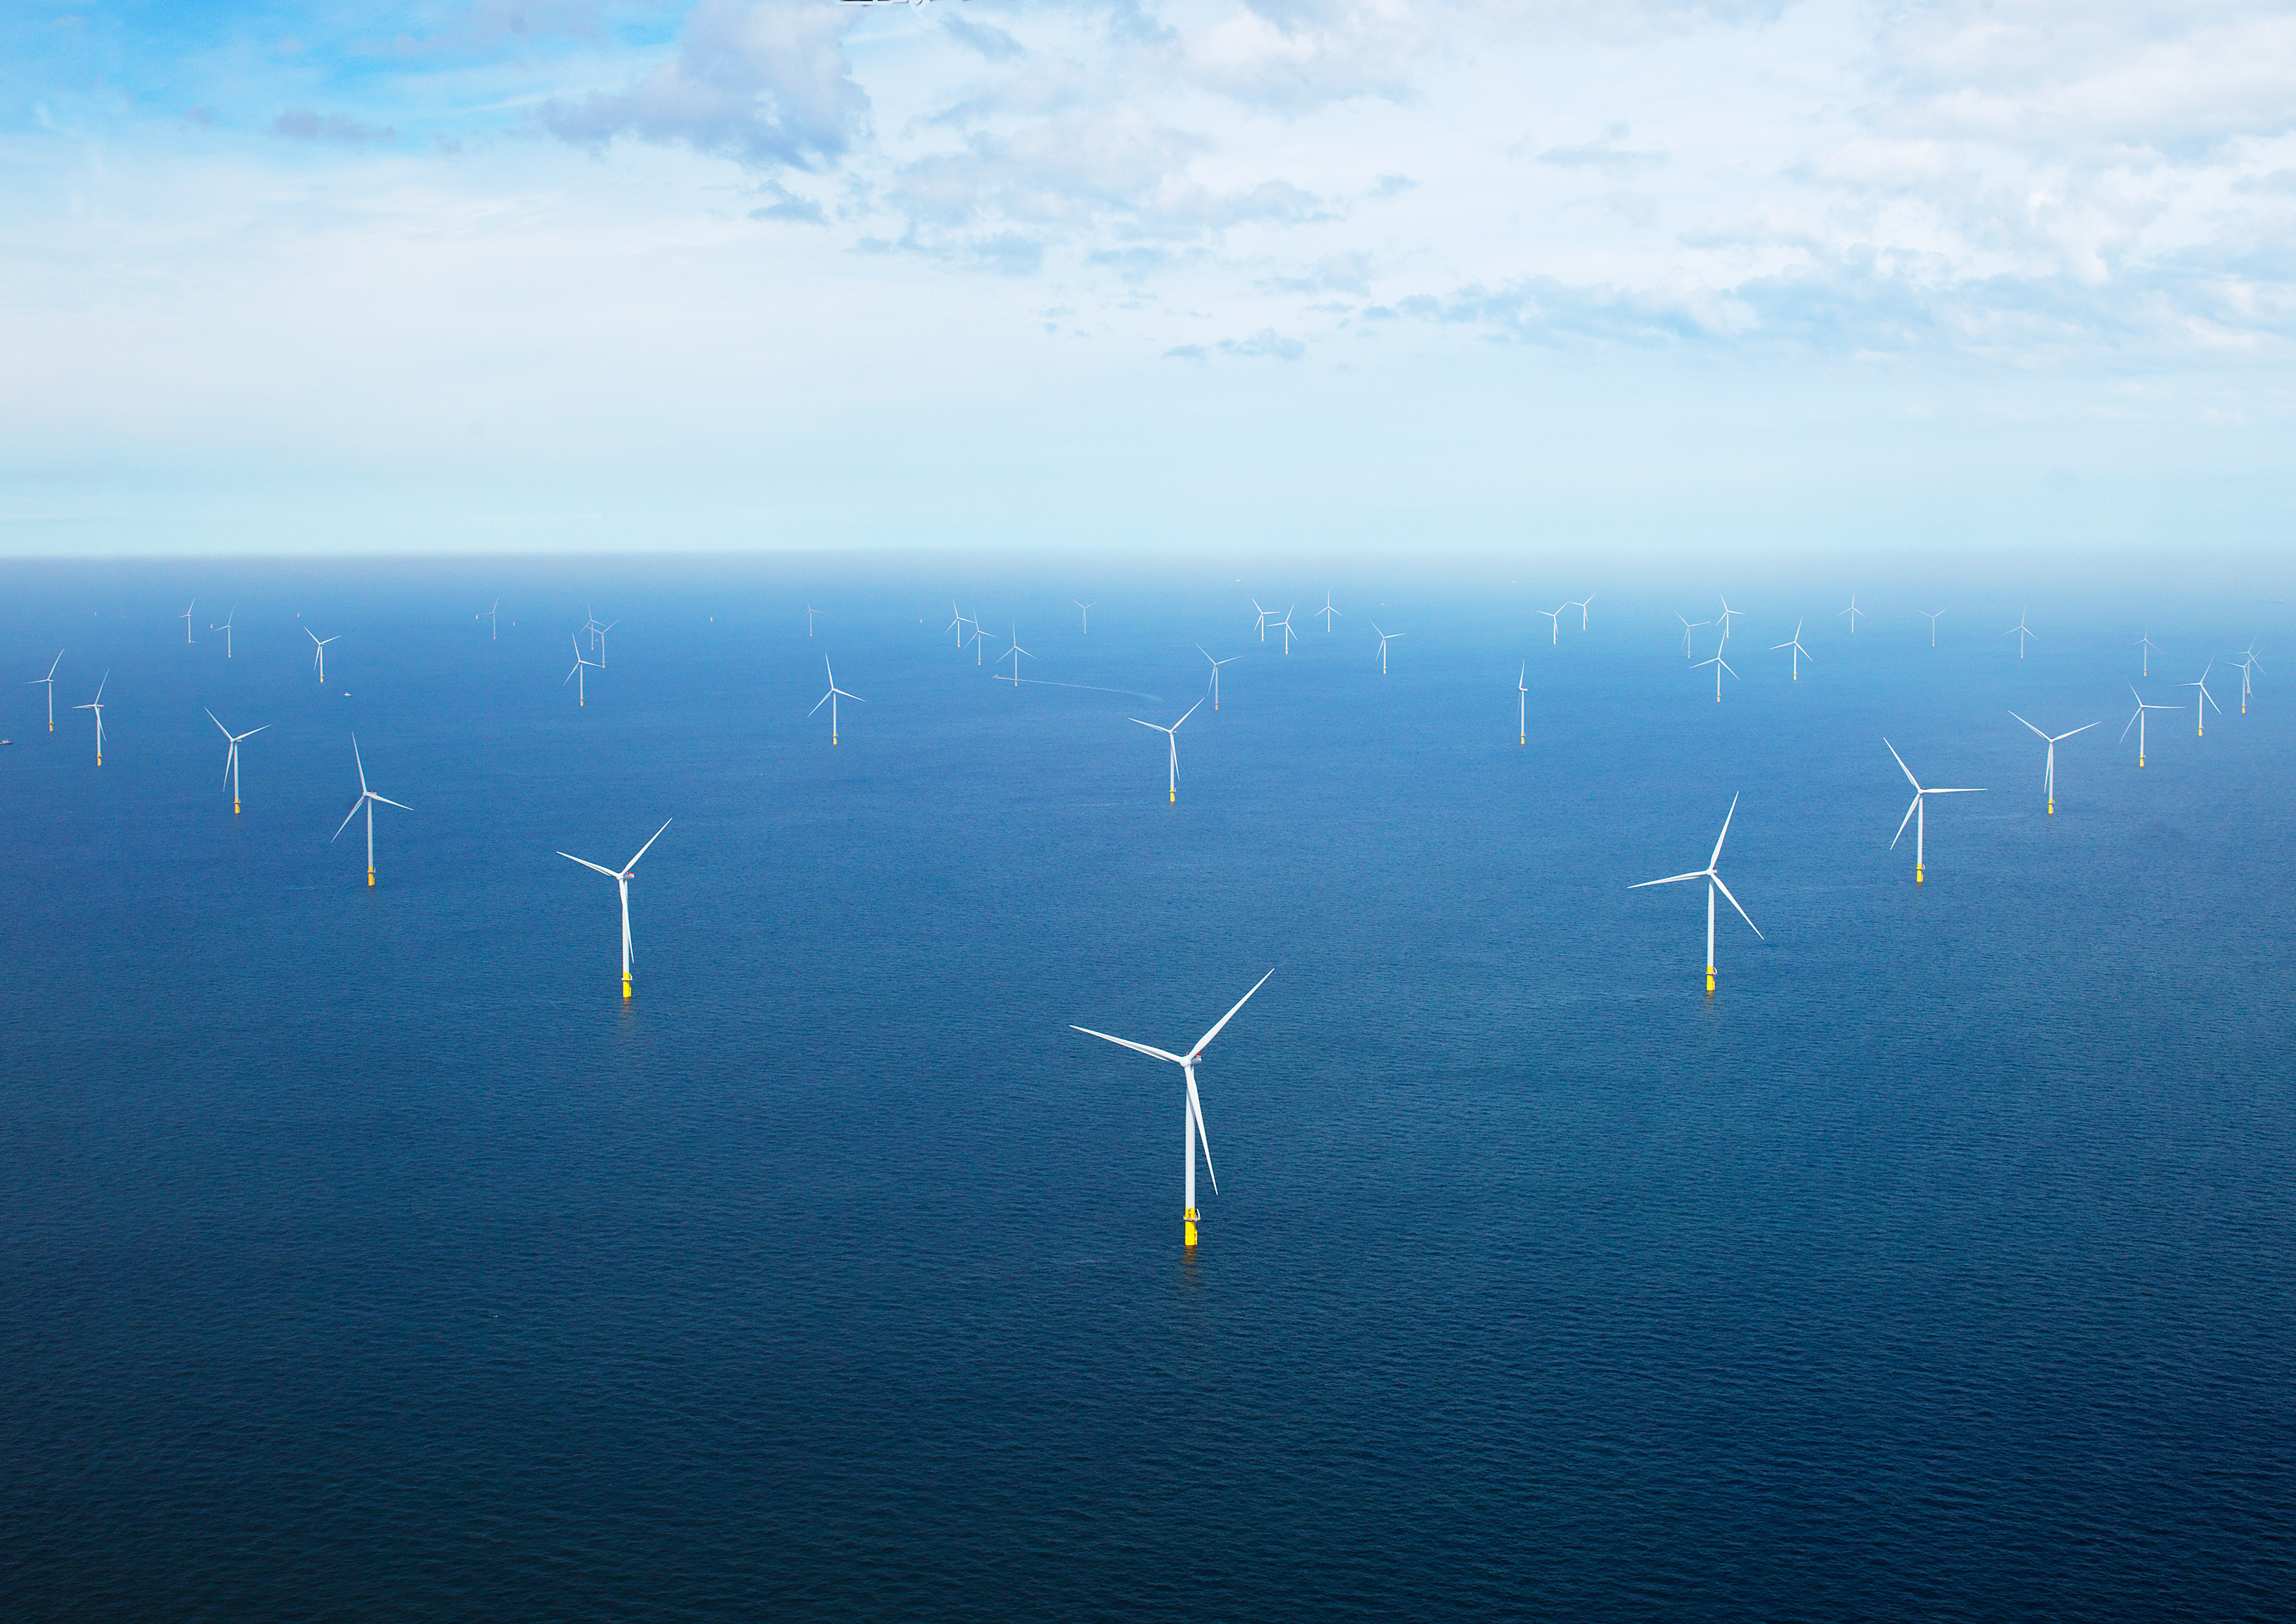 Norwegian oil fund partners with Ørsted on Borssele 1&2 offshore wind farm